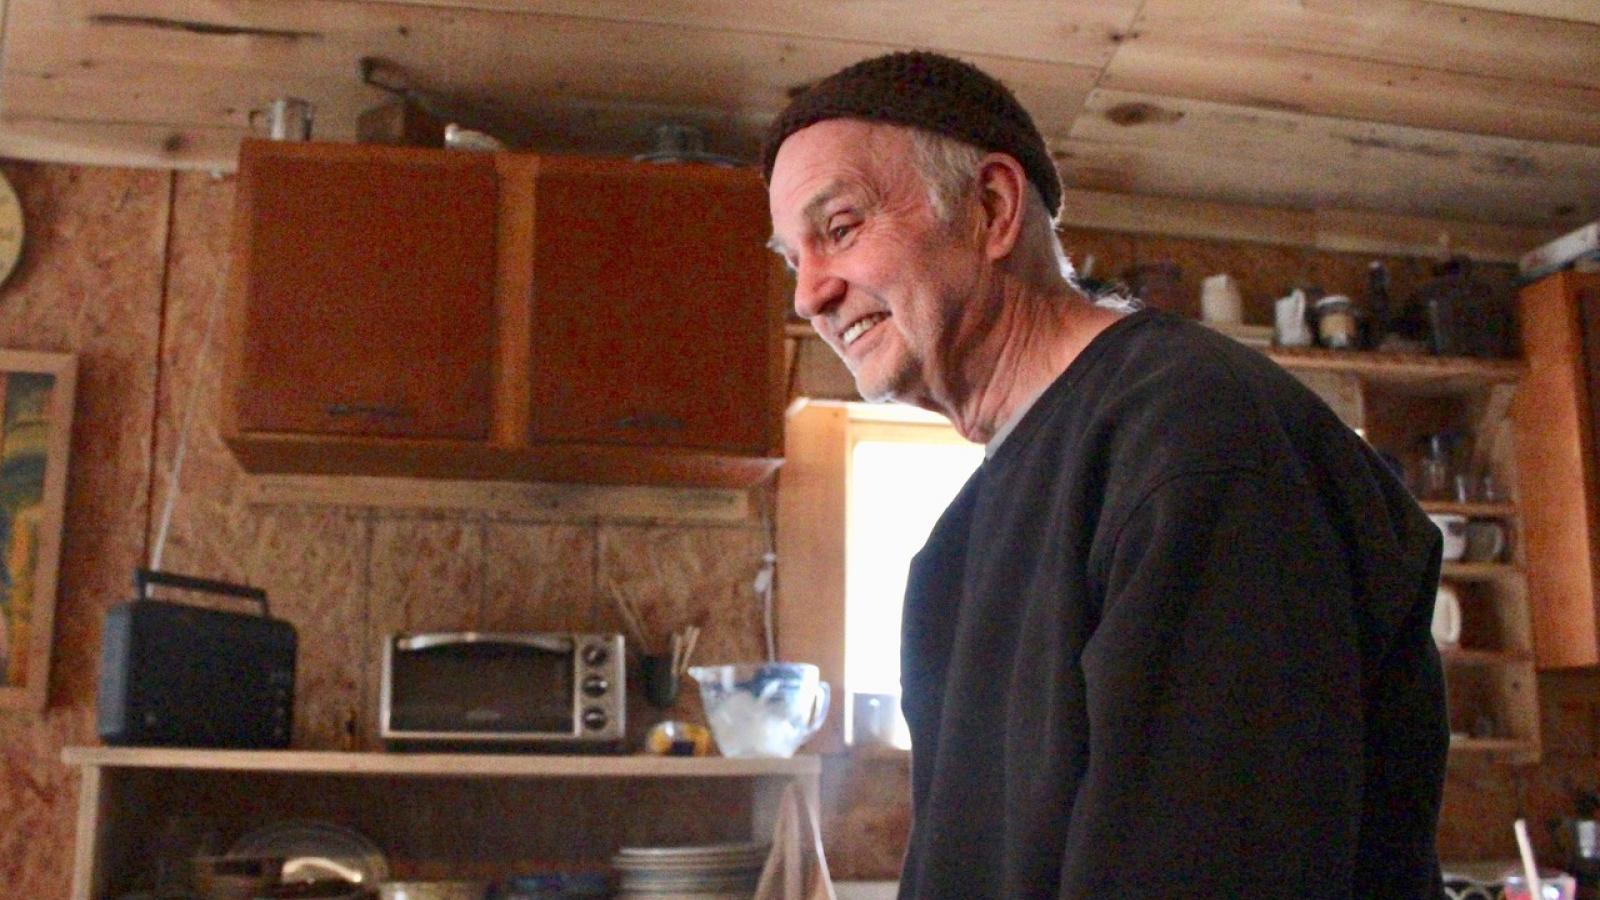 Brian Richards pictured in his home in Upper Twin Creek